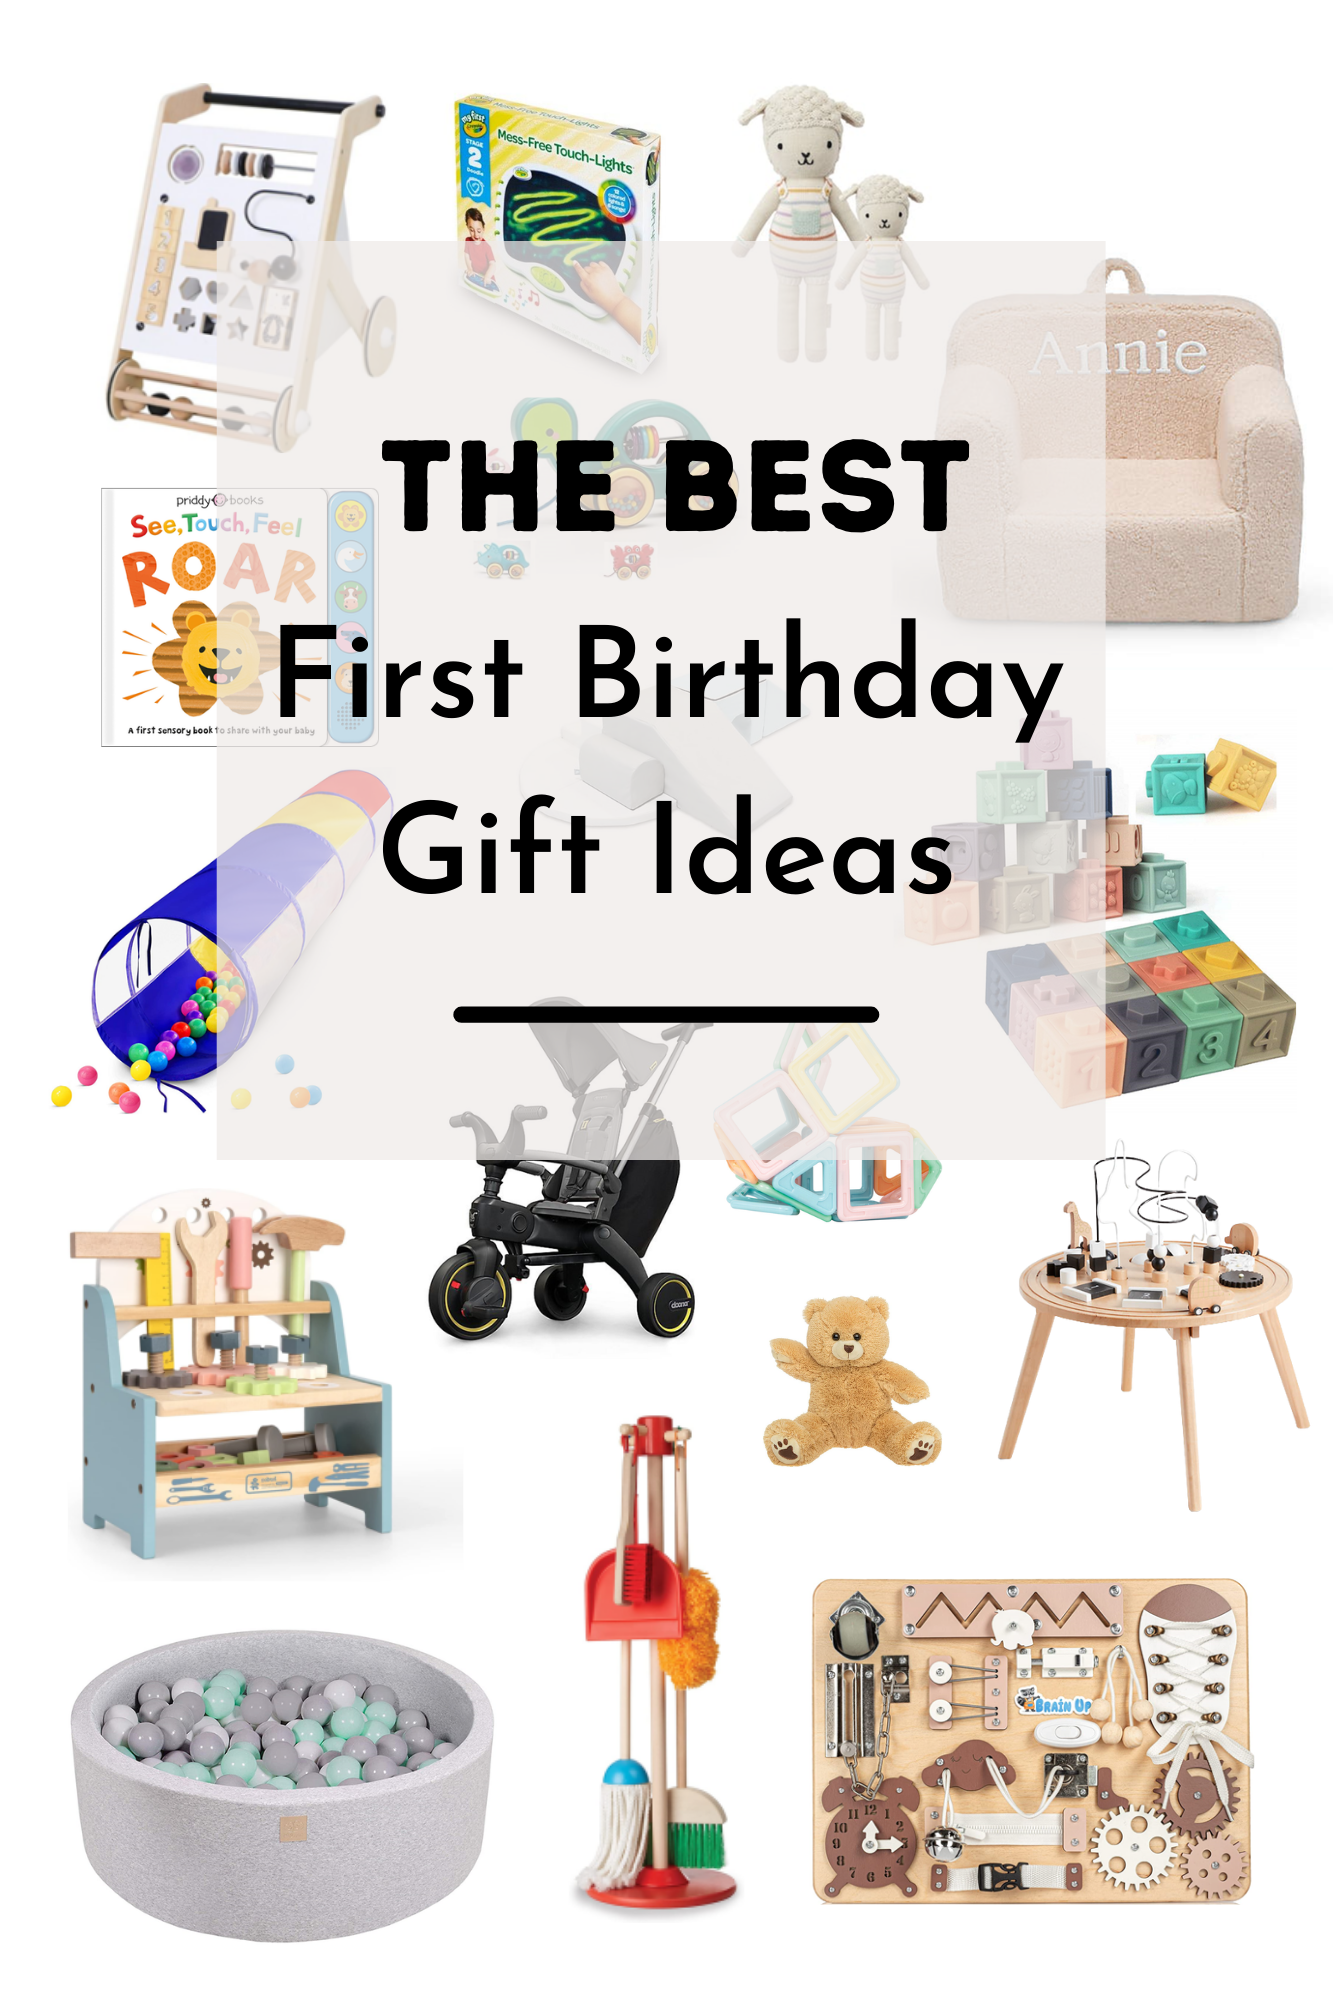 The Best First Birthday Gift Ideas - By Lana Ly